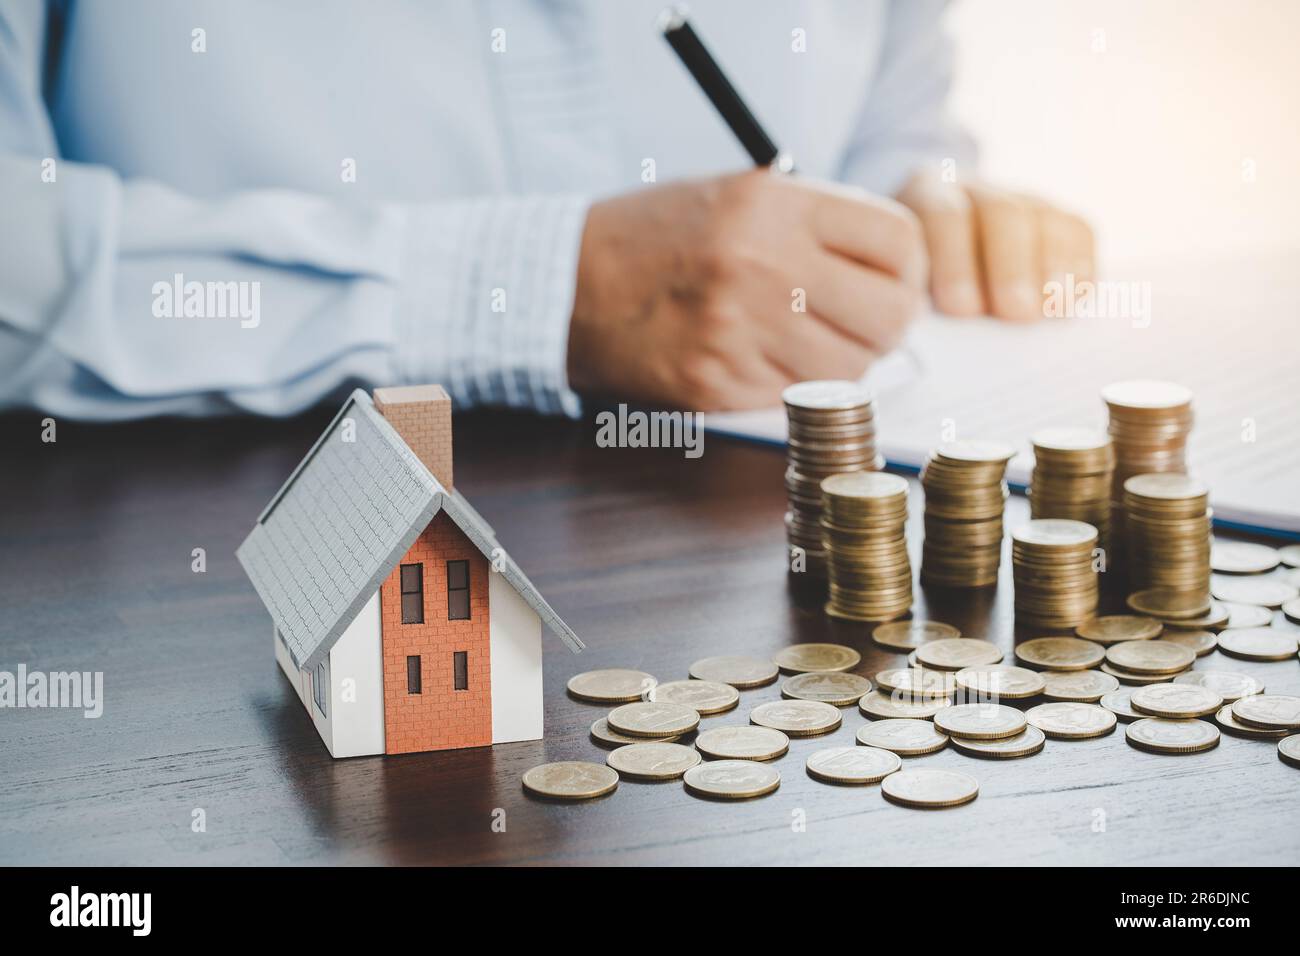 House model with stack coins, business hand is planning savings money of coins for buy home. concept for property ladder, mortgage with real estate in Stock Photo